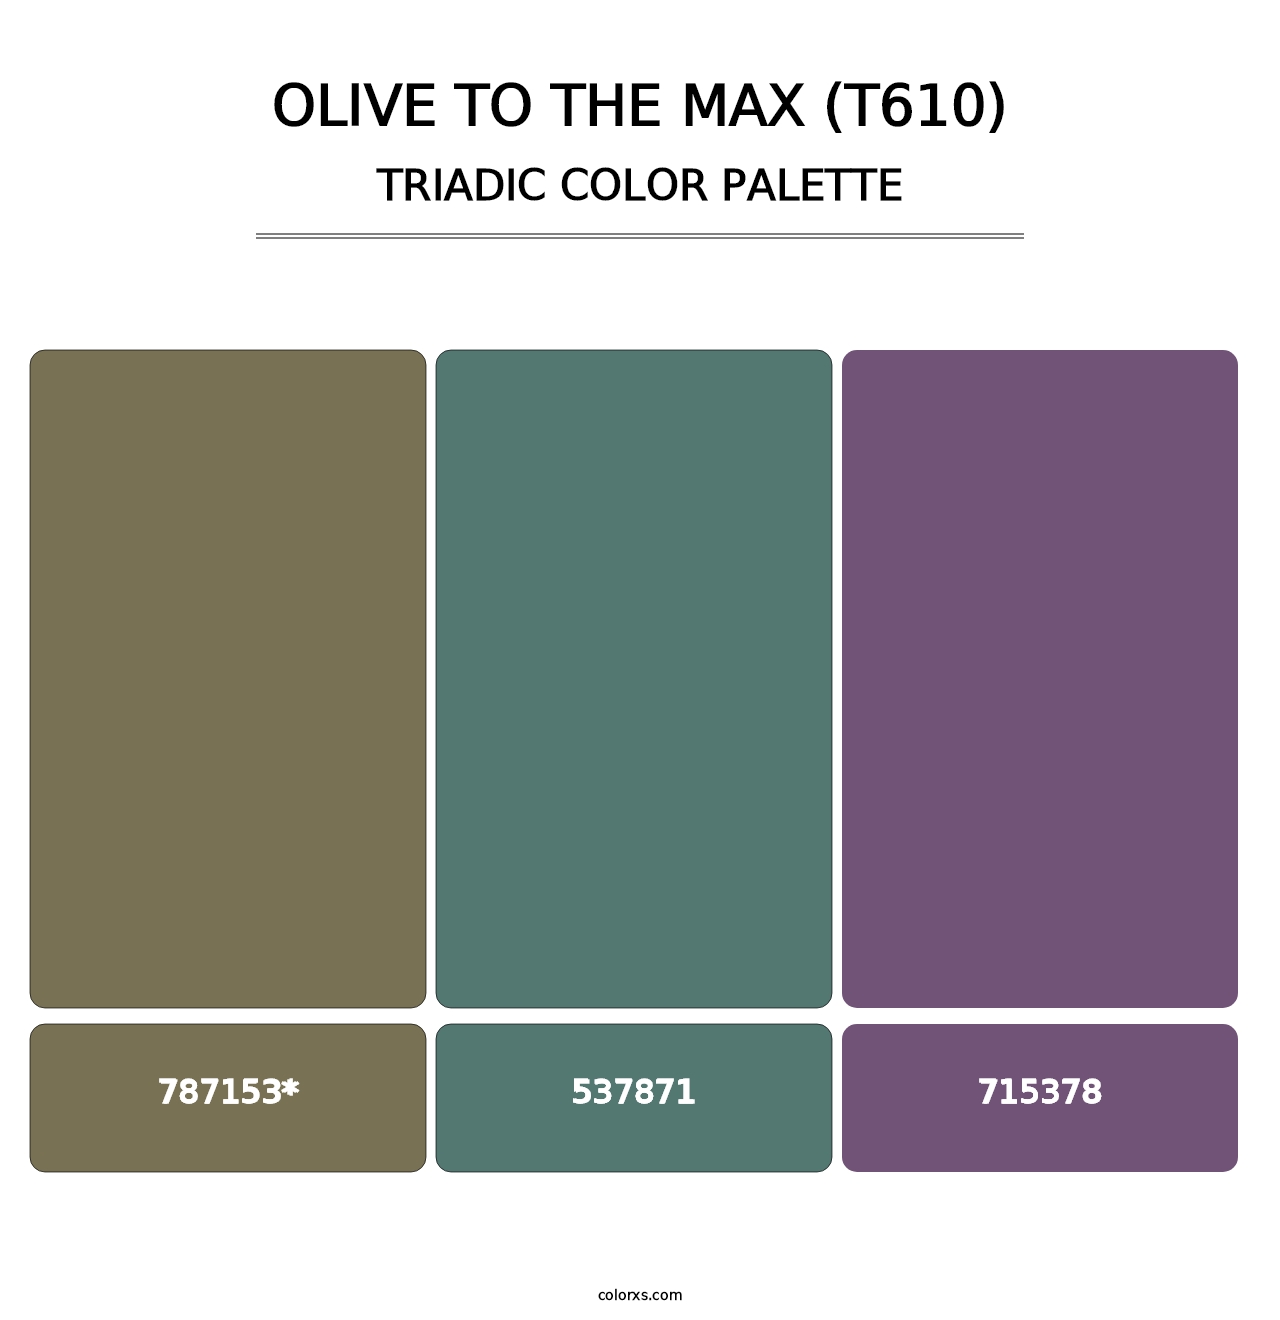 Olive to the Max (T610) - Triadic Color Palette